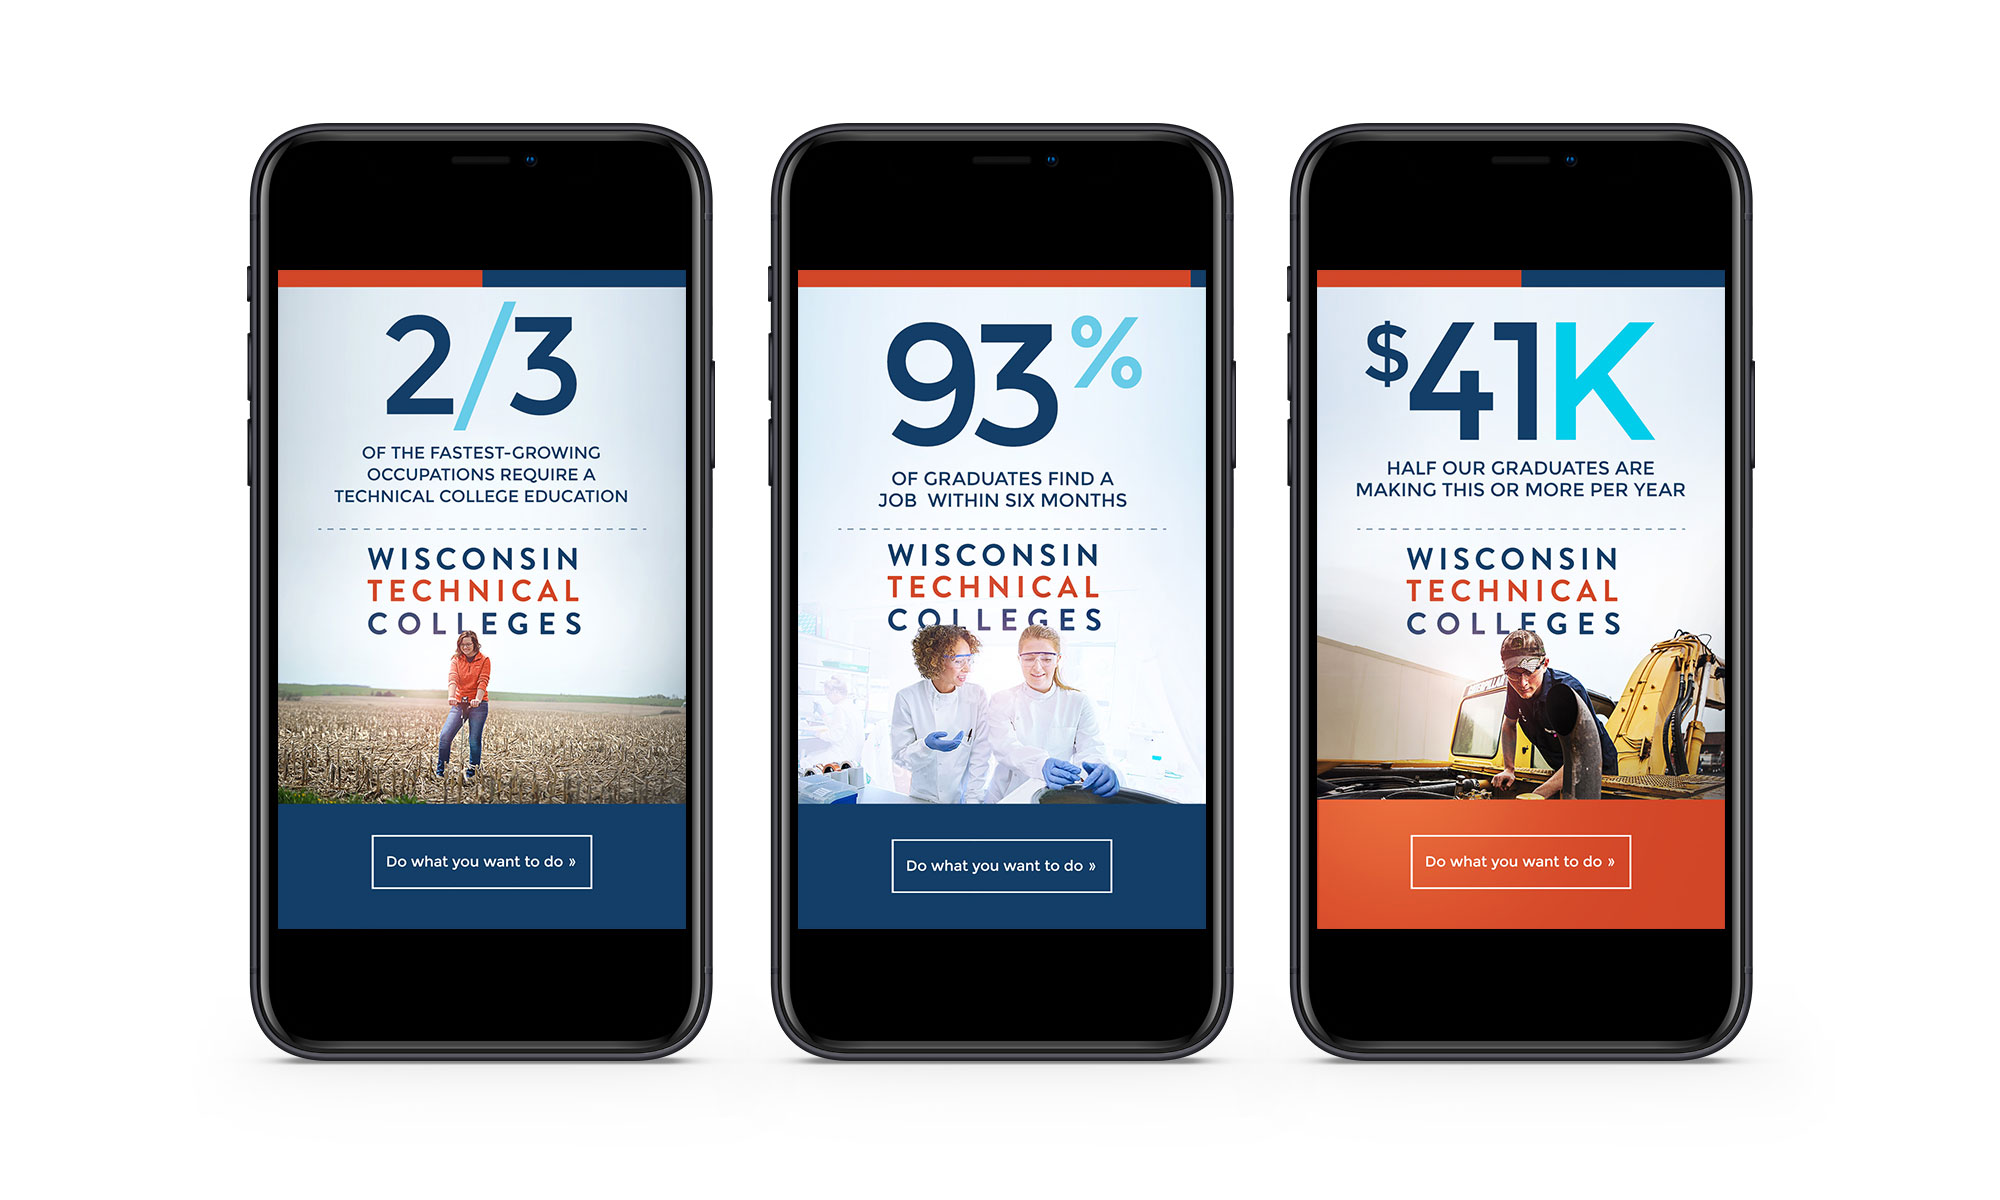 3 Wisconsin Technical Colleges digital ads on phone screens showing key stats and a do what you want to do call to action